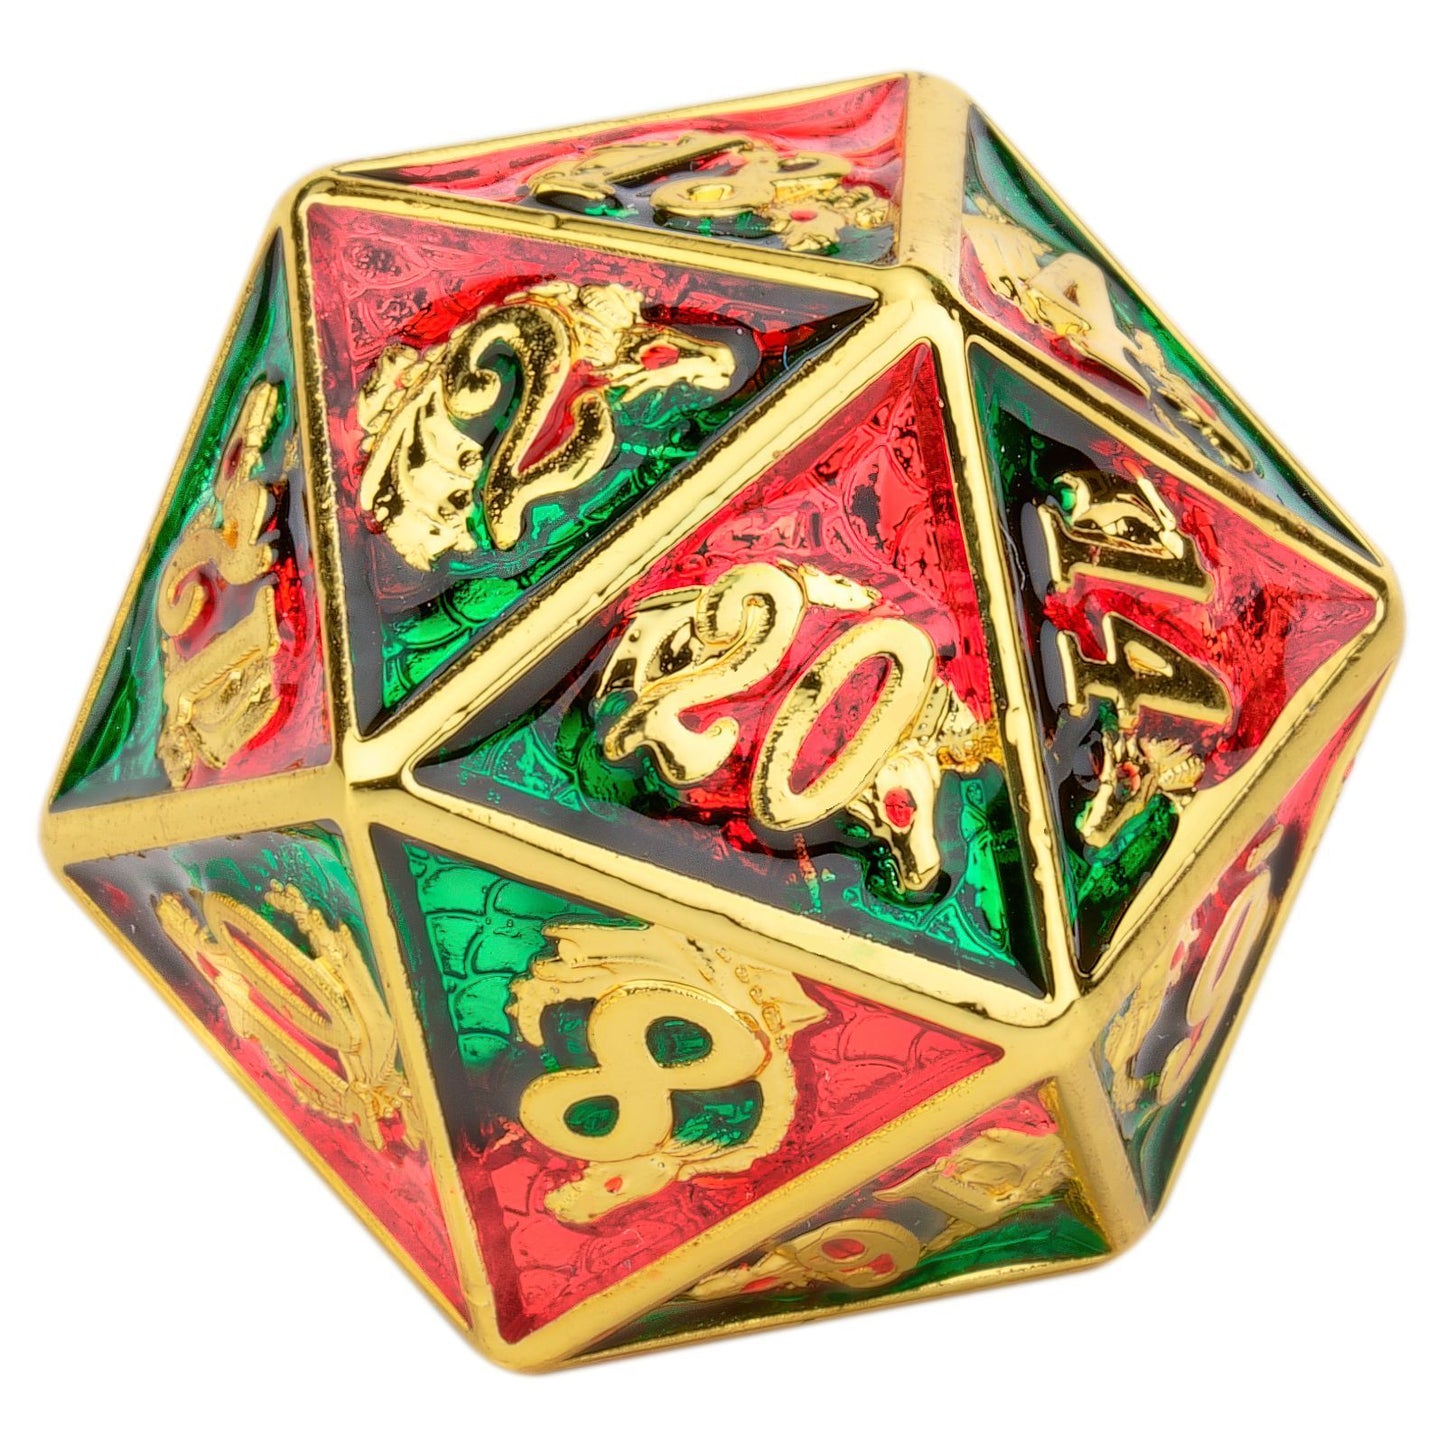 New arrival Gold ruby&emerald painting dragon dice set - HYMGHO Dice 